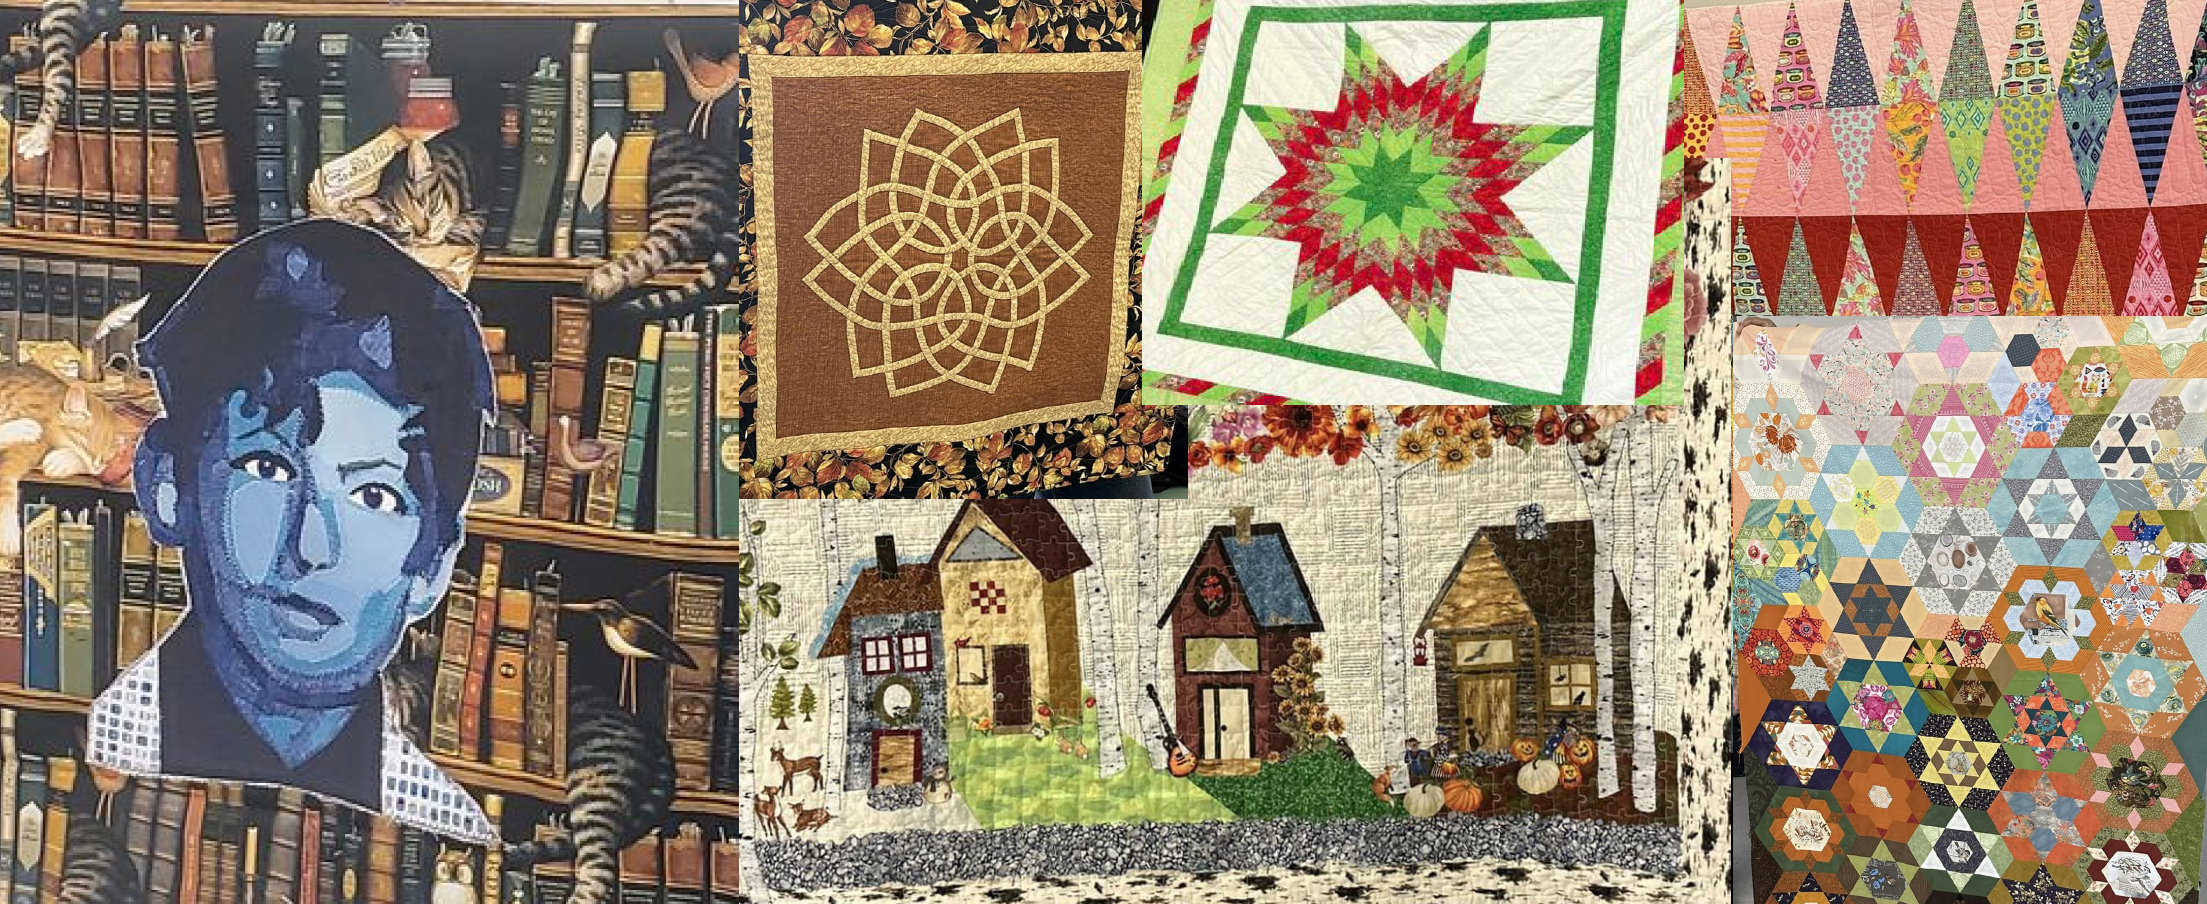 Lake of the Woods Quilt Guild 37th Annual Show